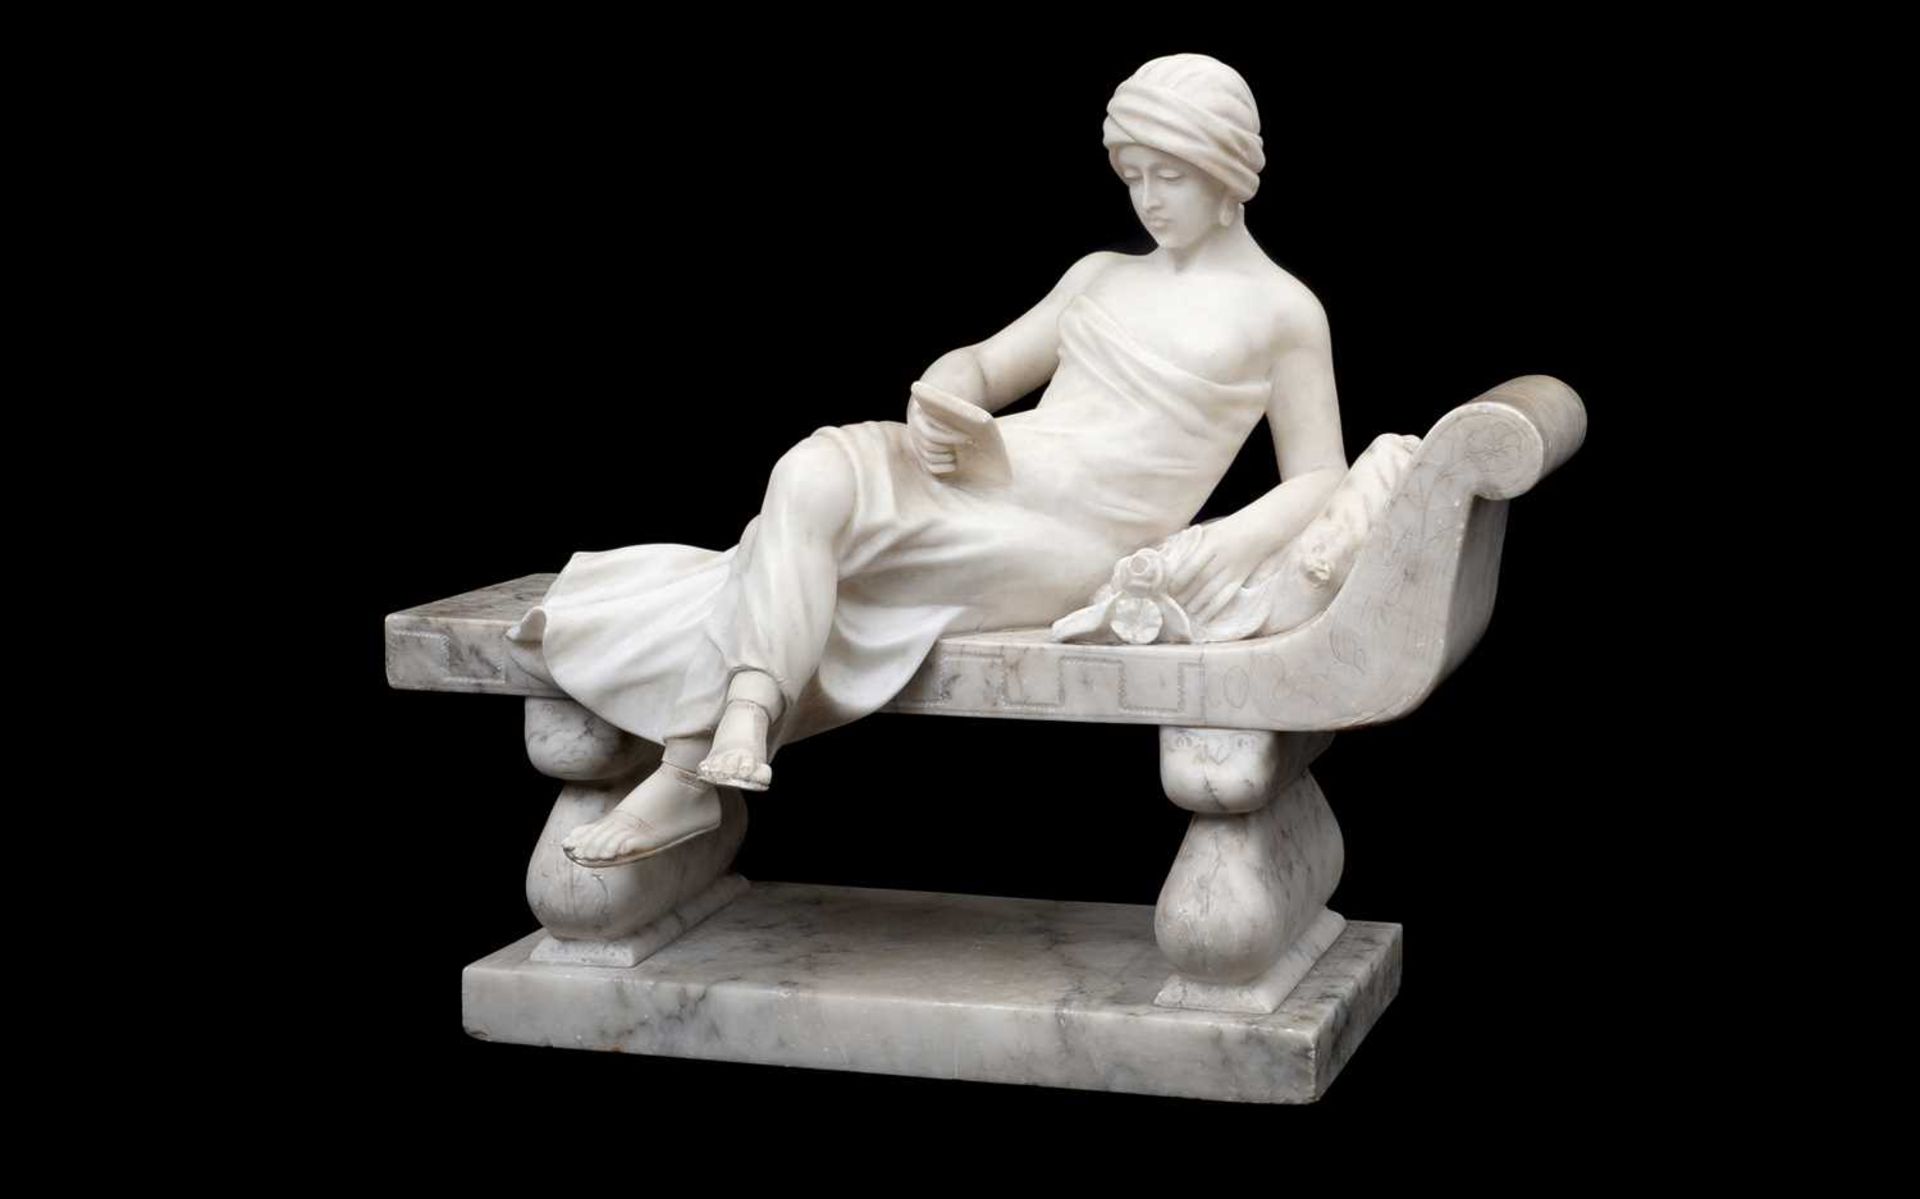 A LATE 19TH CENTURY ITALIAN ALABASTER FIGURE OF A RECLINING MAIDEN - Image 2 of 4